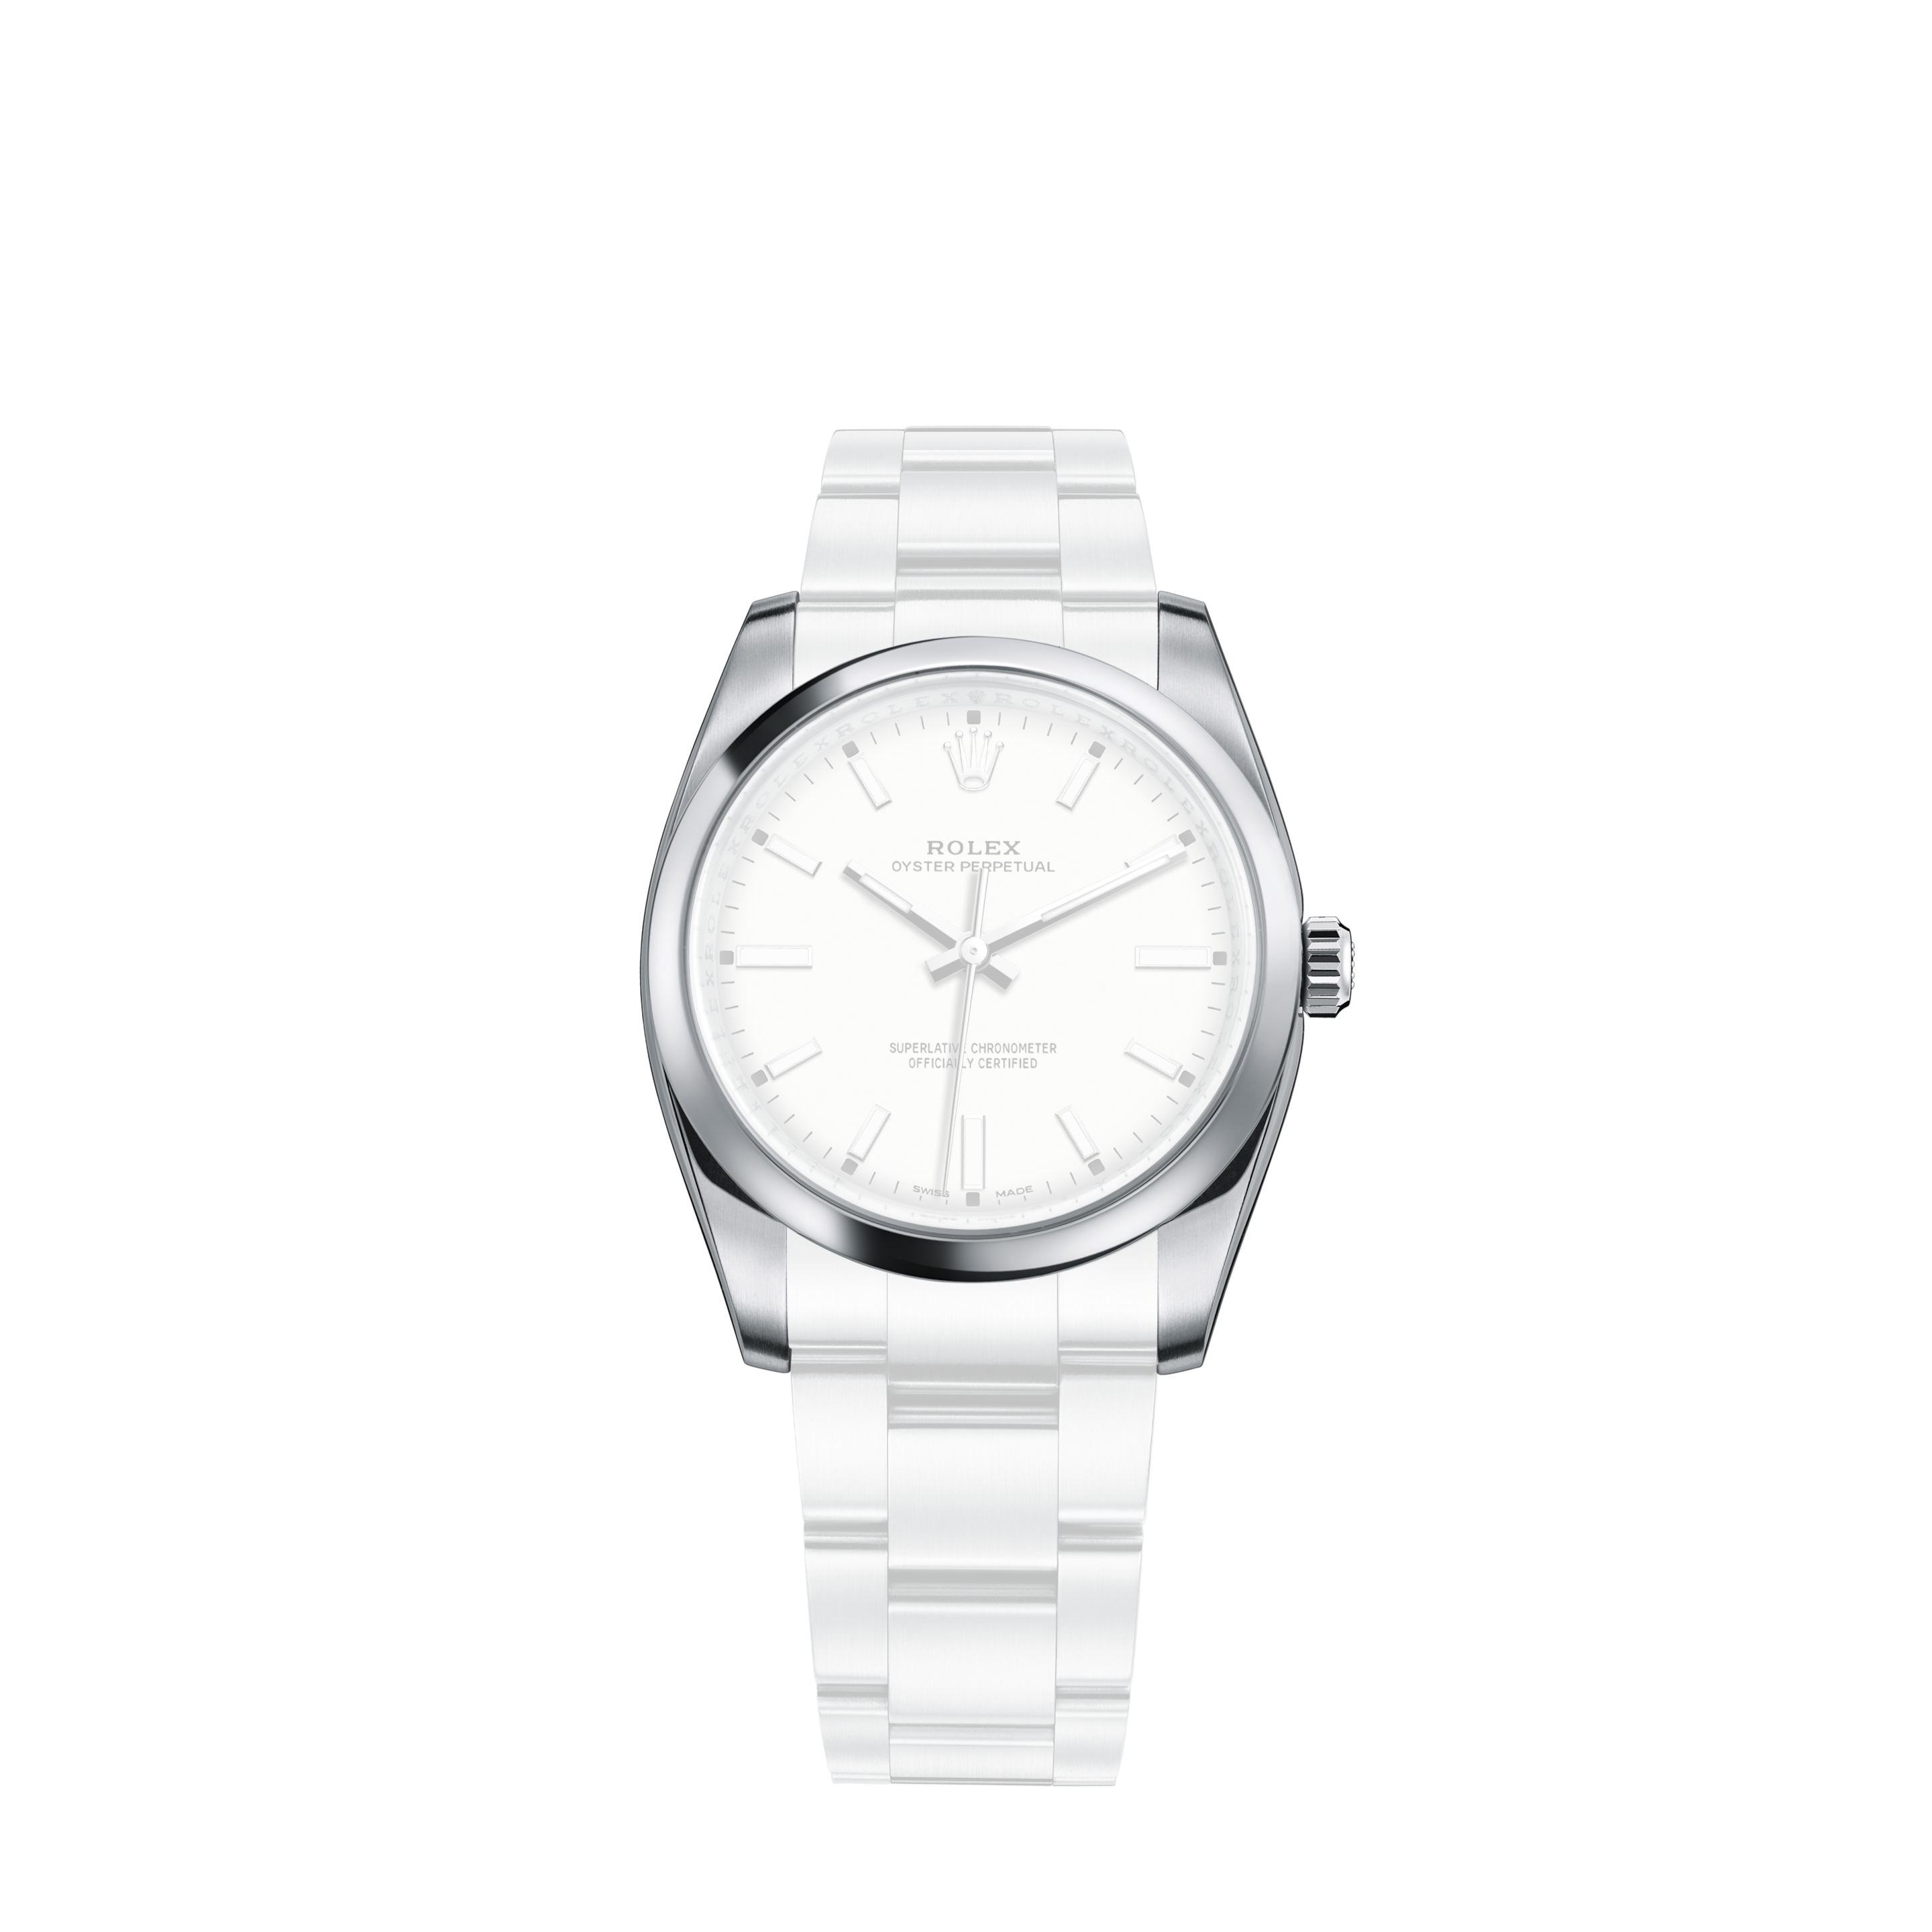 Rolex Oyster Perpetual Datejust 36mm in Steel & White Gold With White Diamond Dial